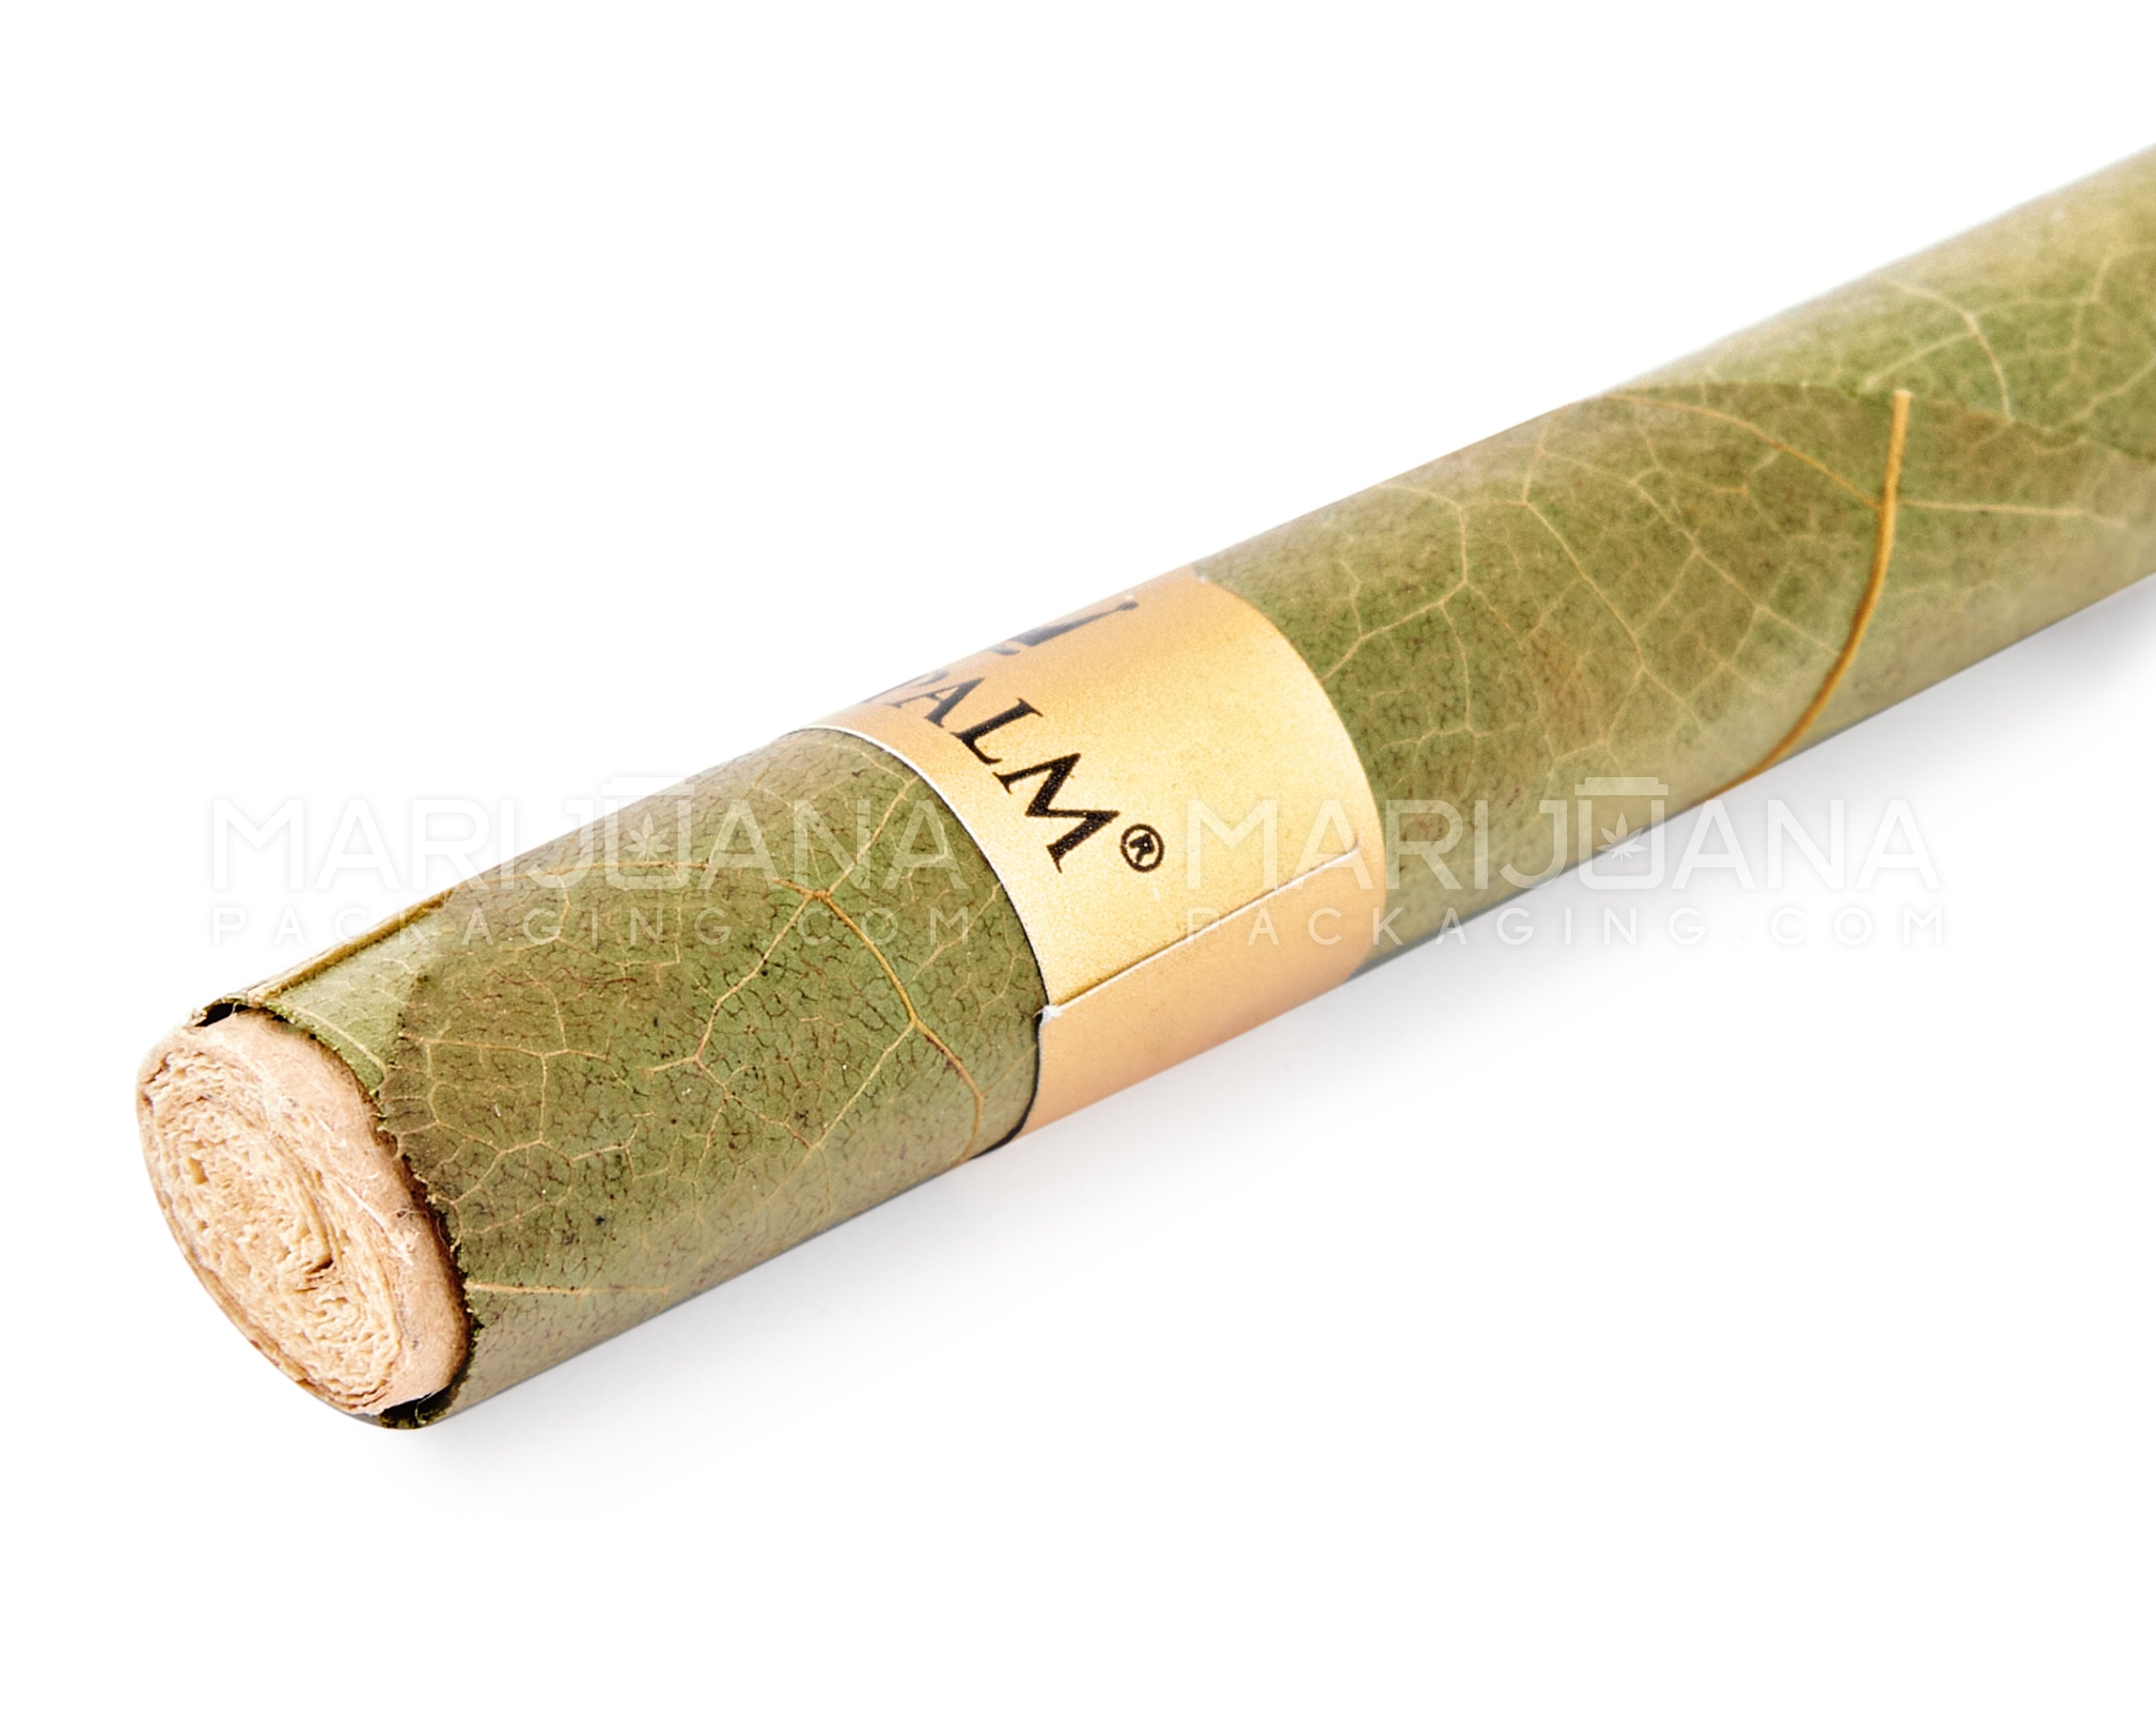 KING PALM | 'Retail Display' Rollie Green Natural Leaf Blunt Wraps | 54mm - Cherry Charm - 20 Count - 6